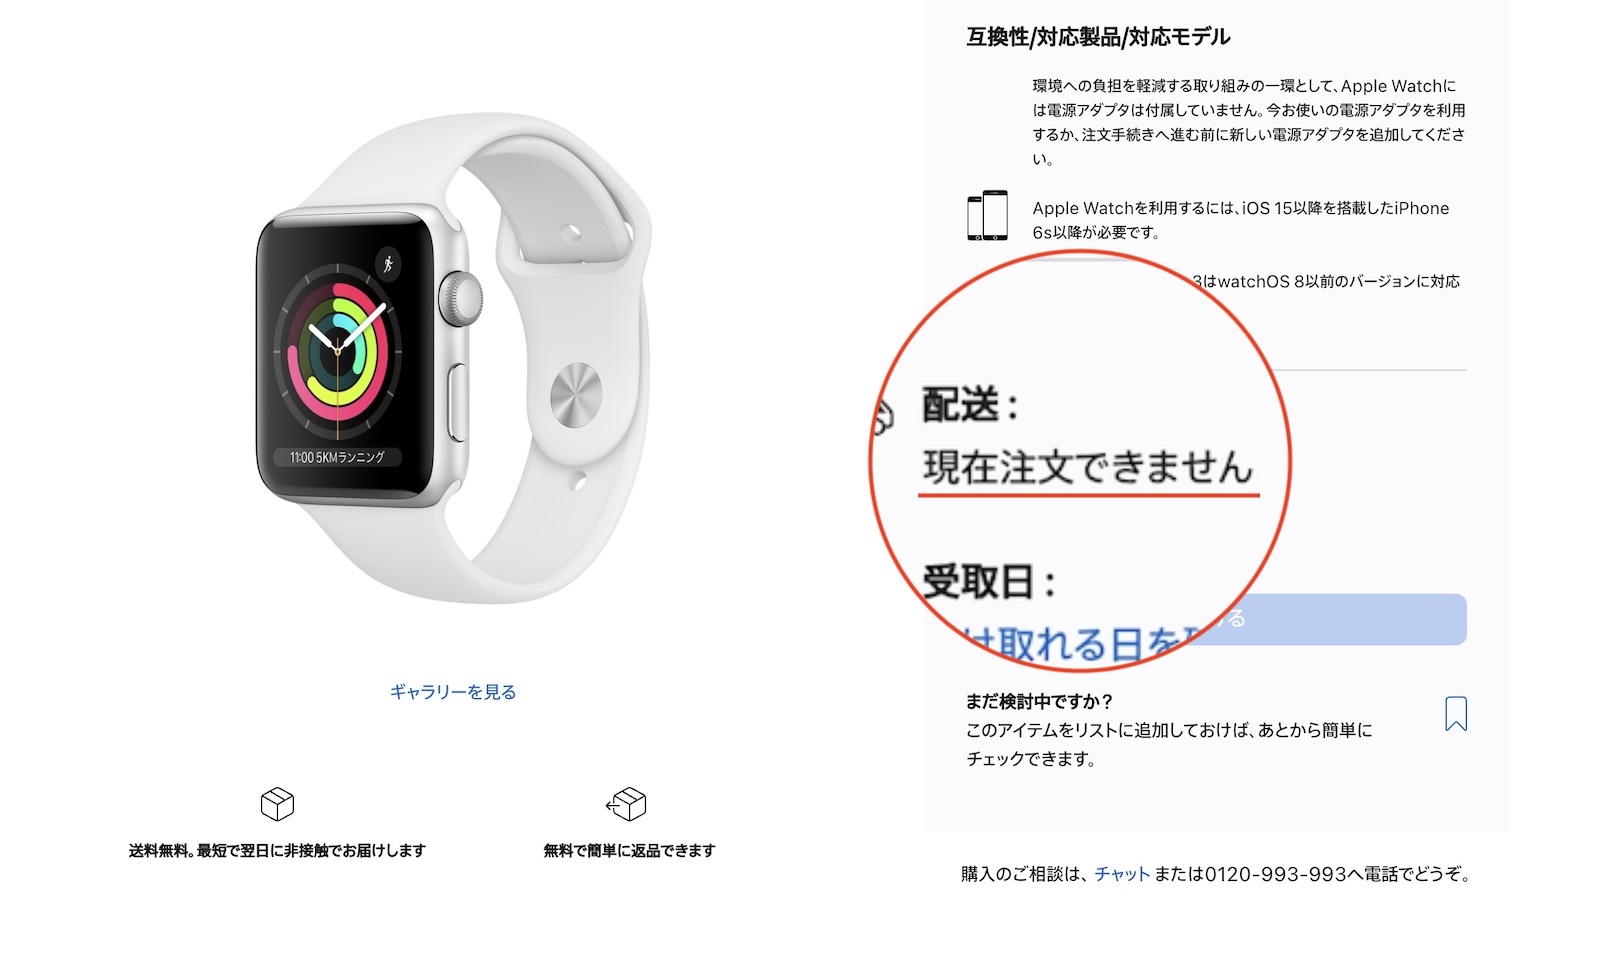 AppleWatchSeries3 out of stock 2